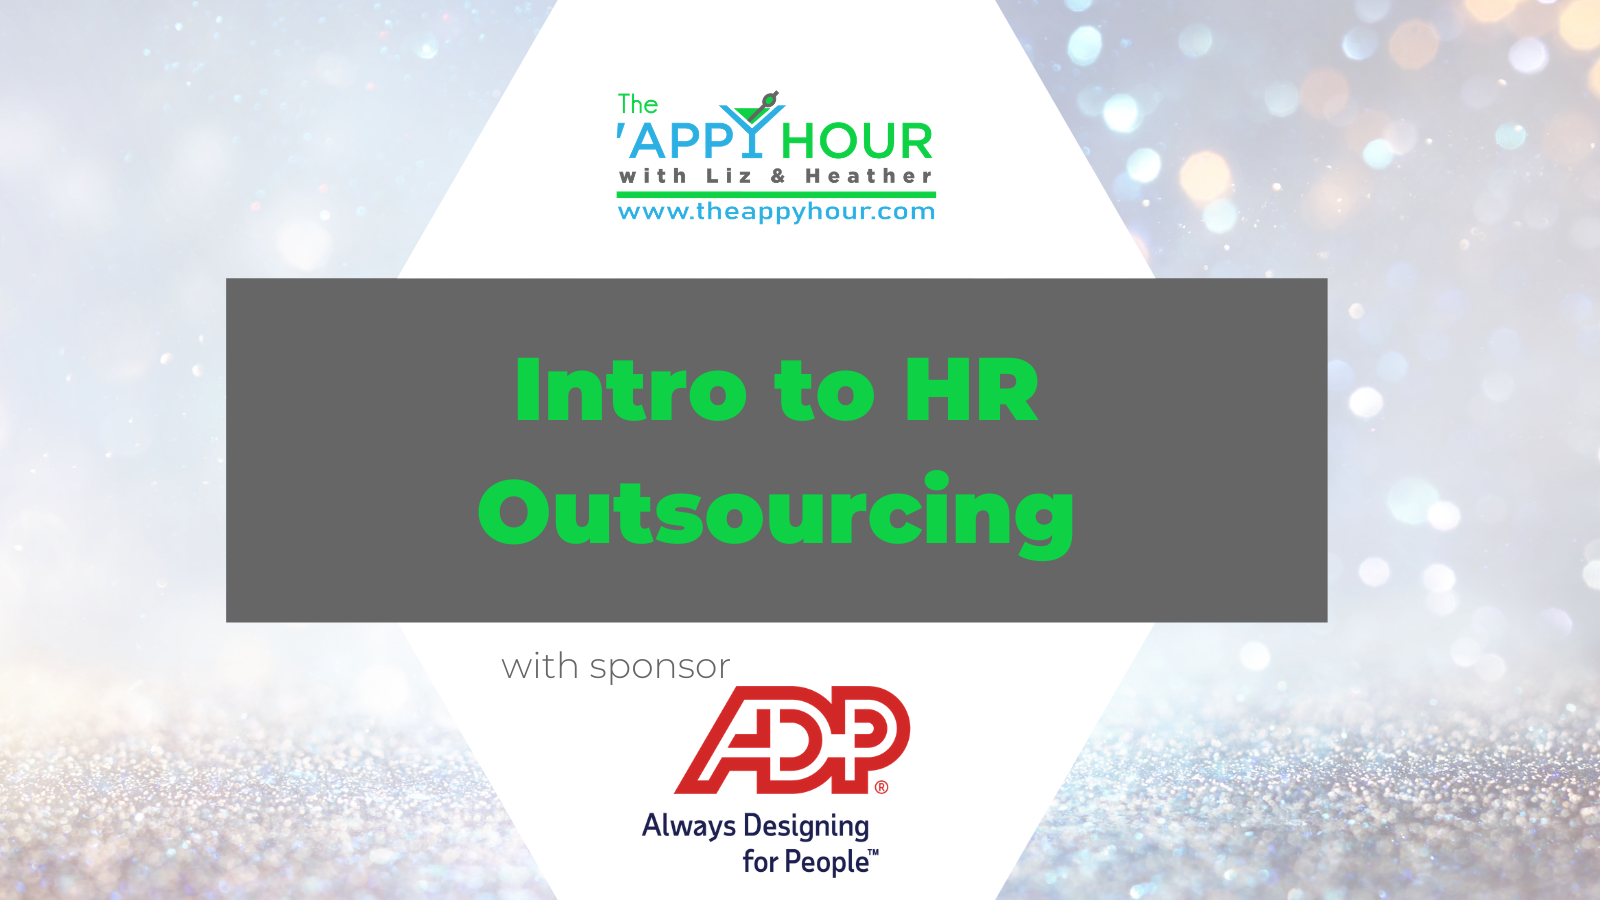 Intro to HR Outsourcing with ADP